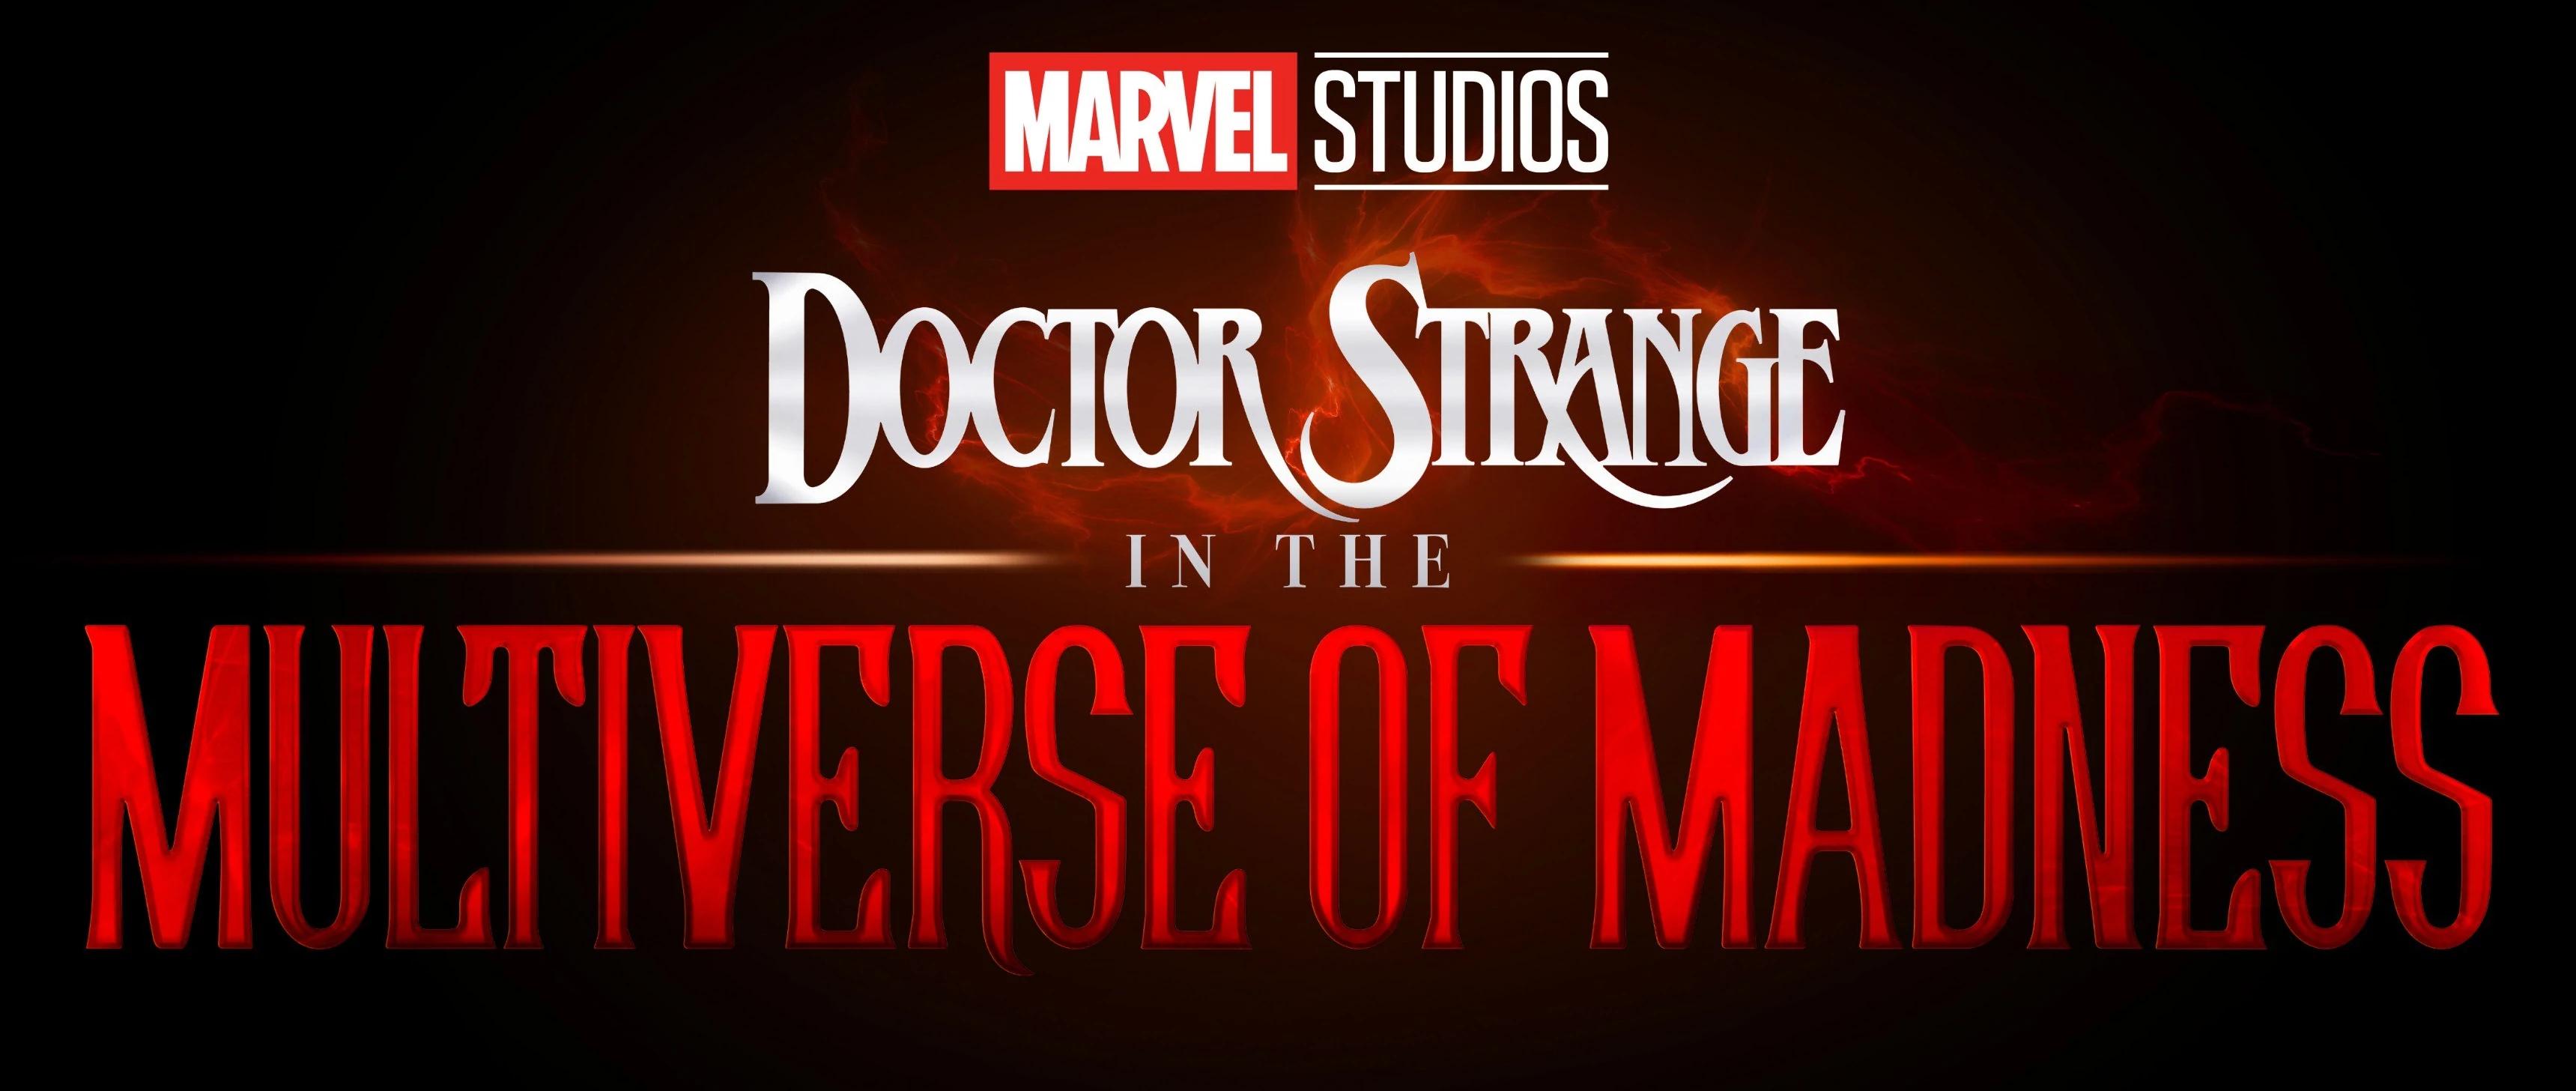 Doctor Strange in the Multiverse of Madness título